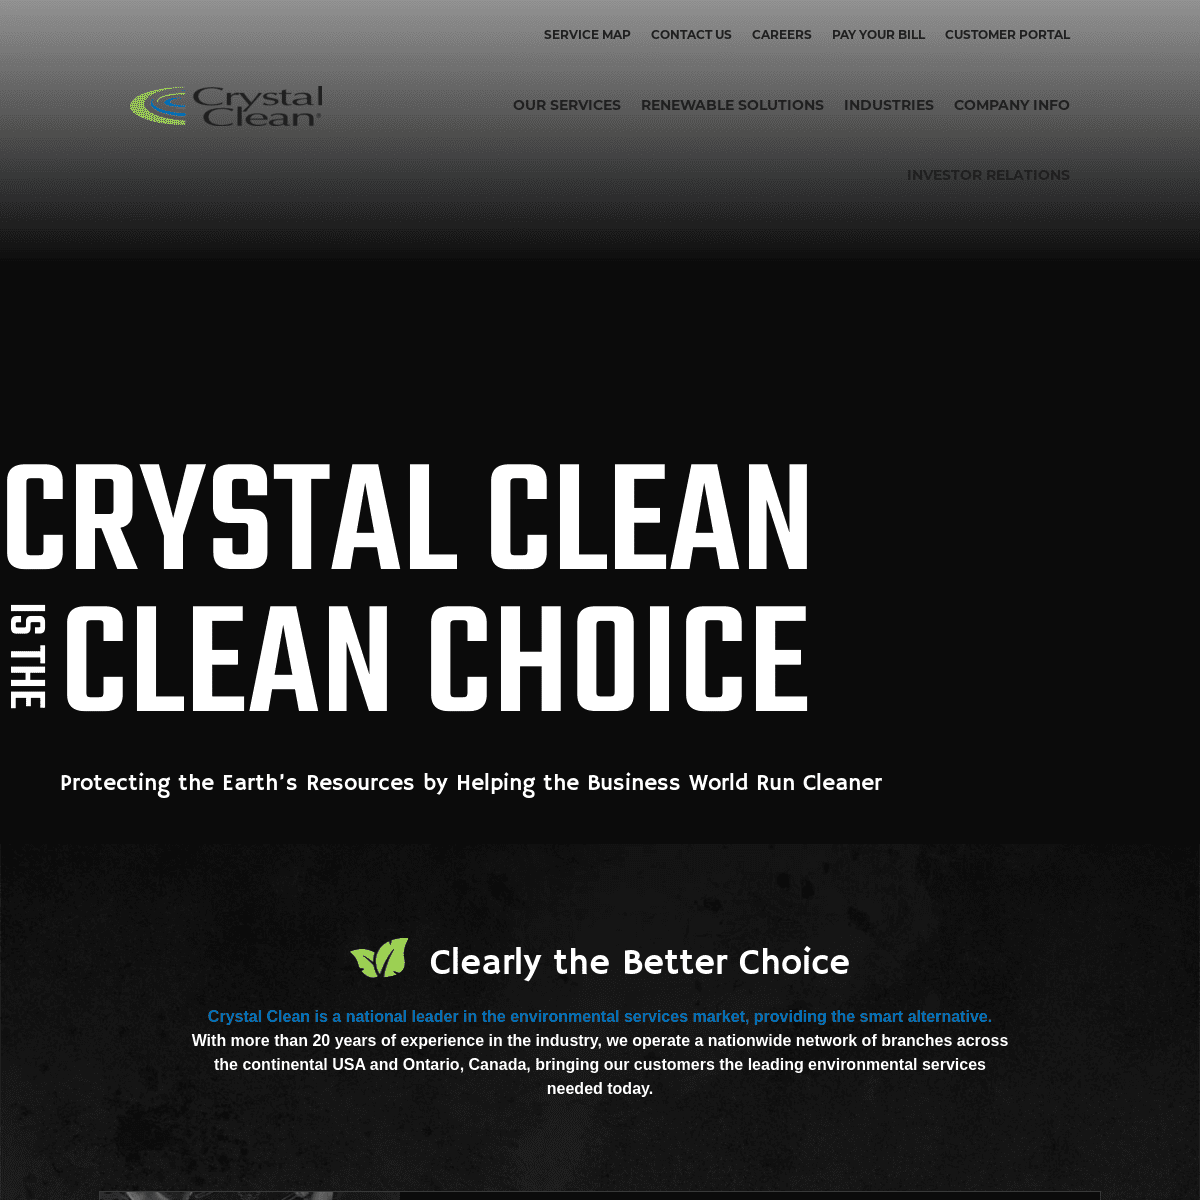 A complete backup of https://crystal-clean.com